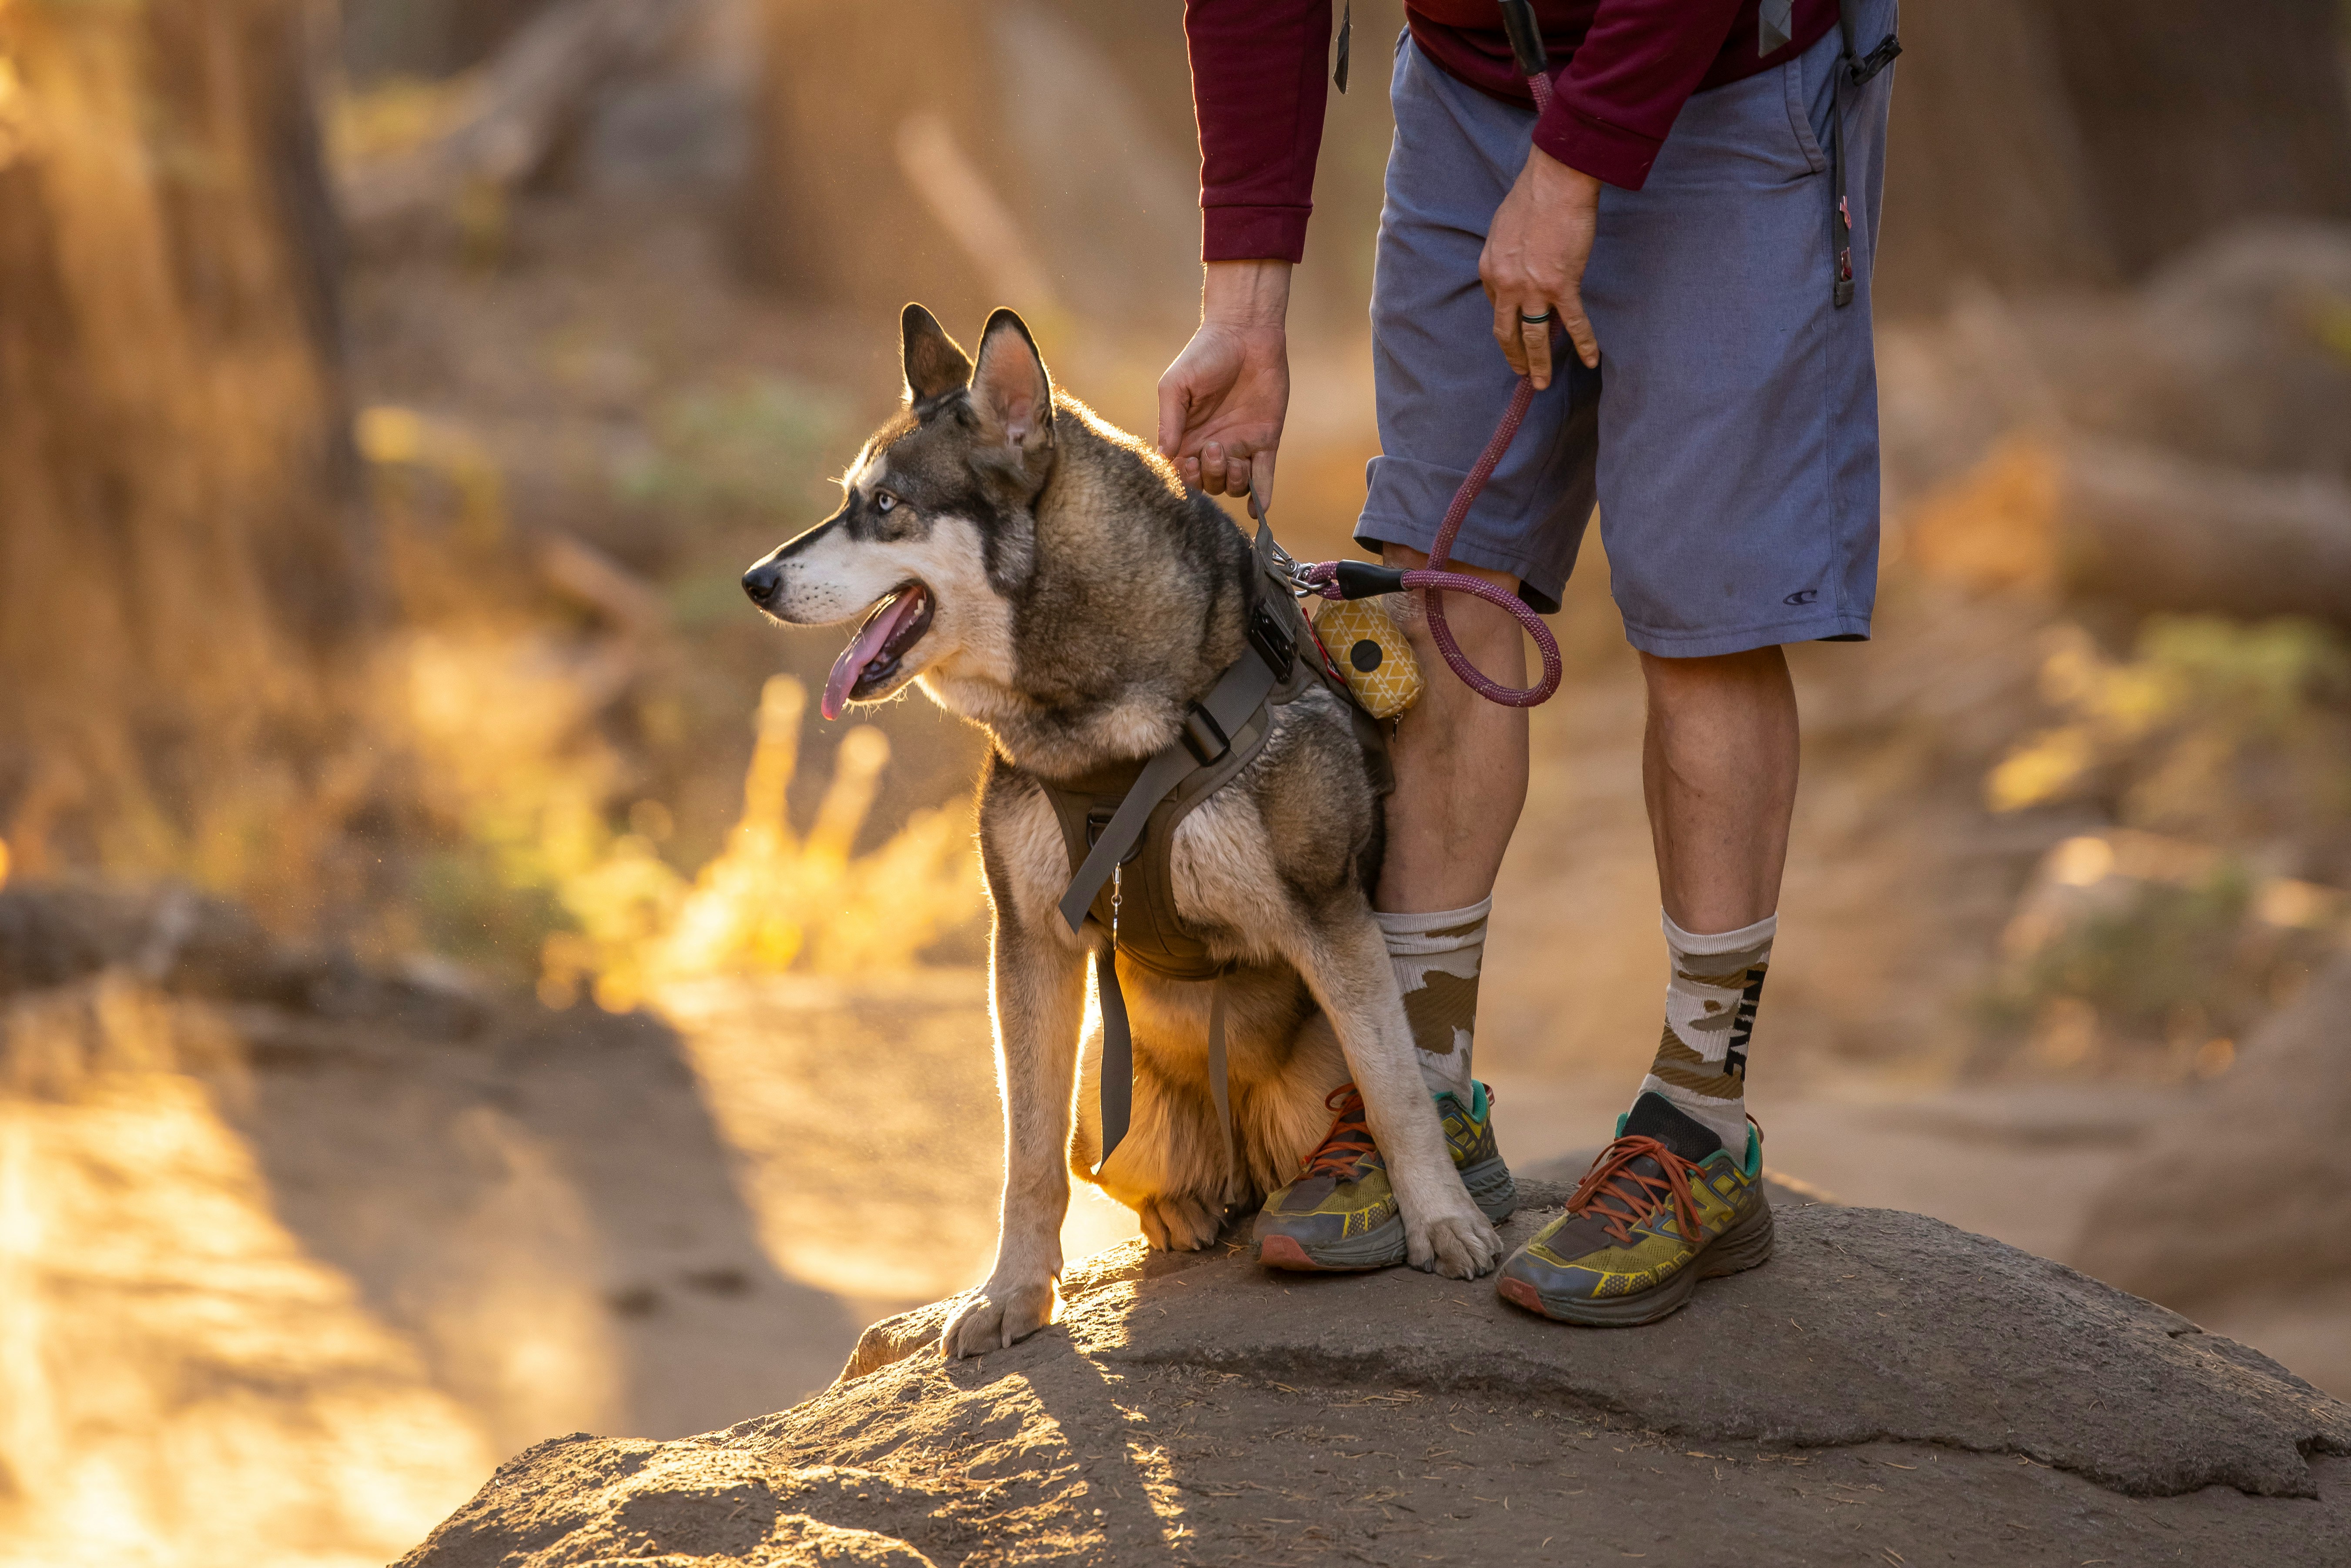 Dog on a leash with person hiking at sunset 